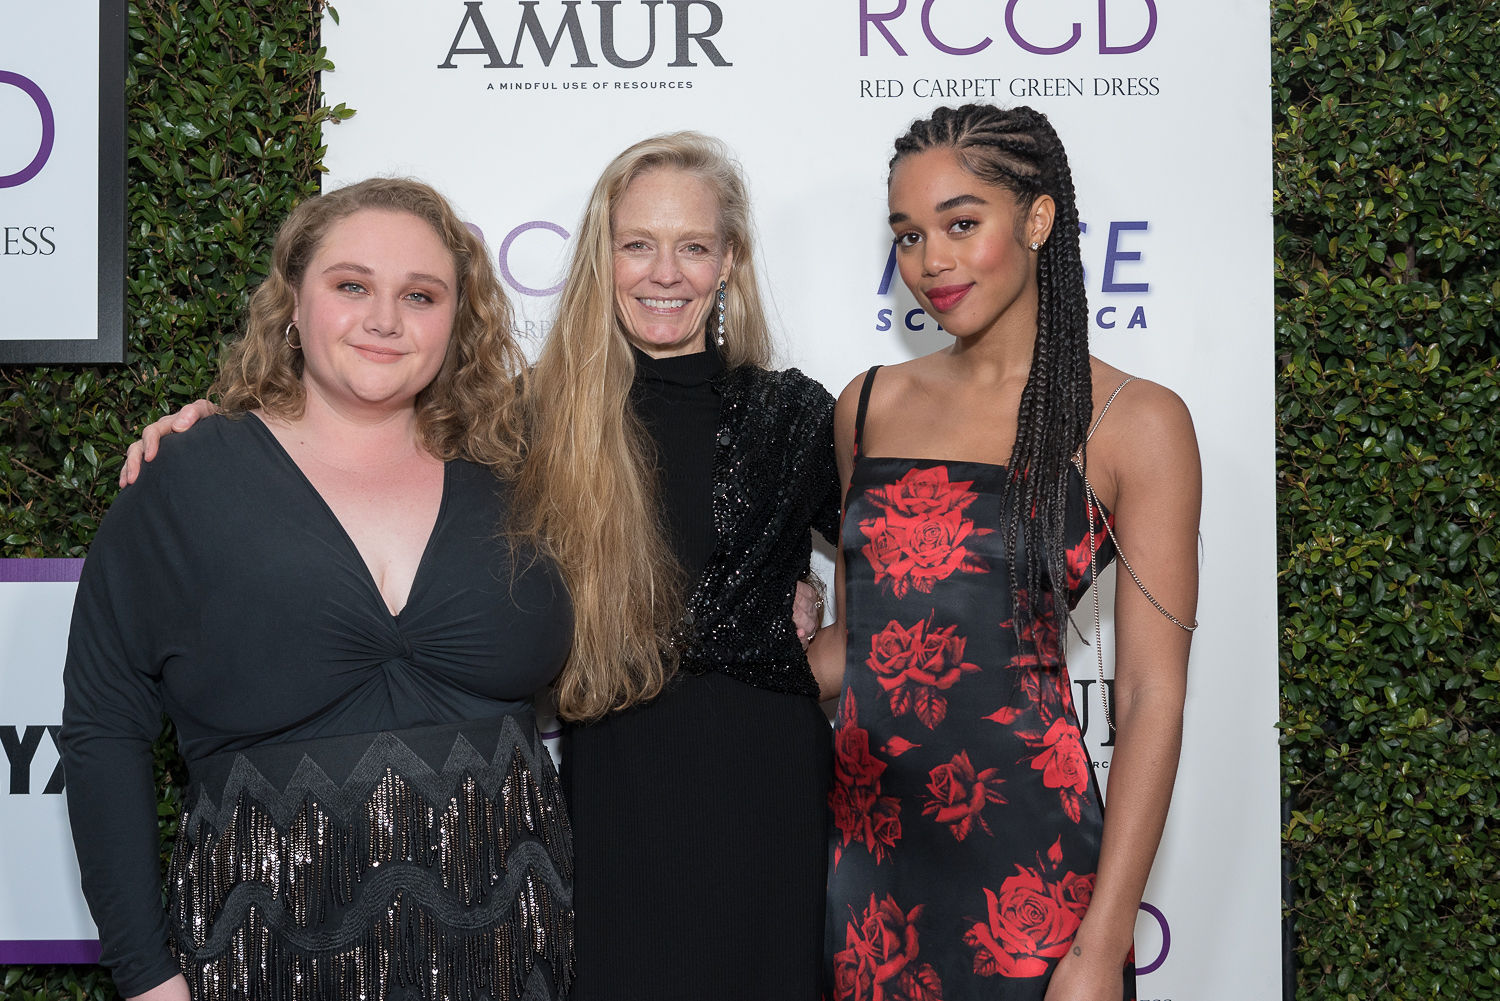  James Cameron, Laura Harrier, Danielle Macdonald, LaKeith Stanfield, Michelle Rodriguez and More Celebrate Red Carpet Green Dress 10 Yr Anniversary